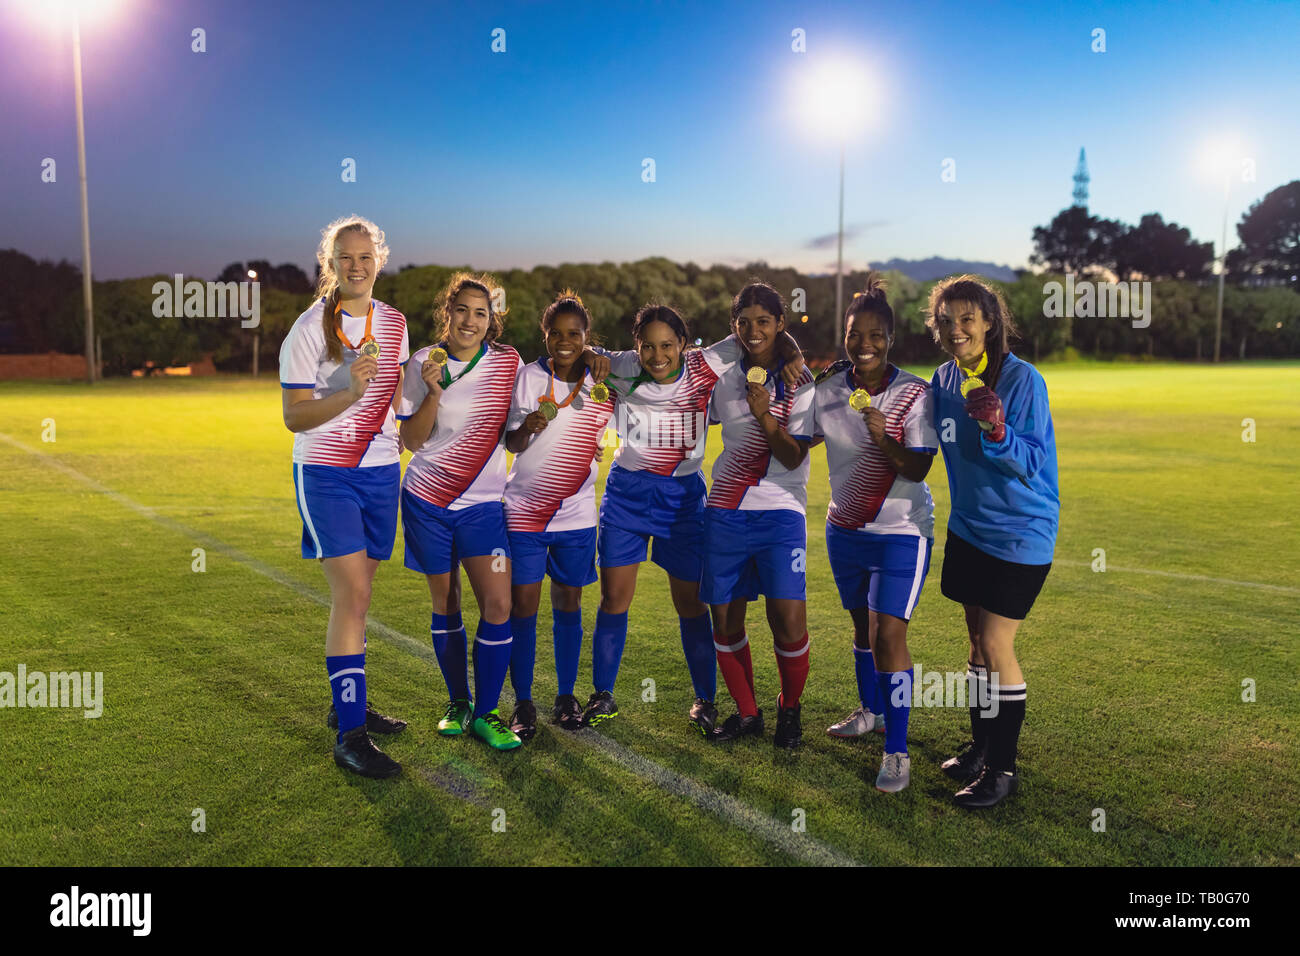 Portrait of soccer team posing with medal in sports field Stock Photo